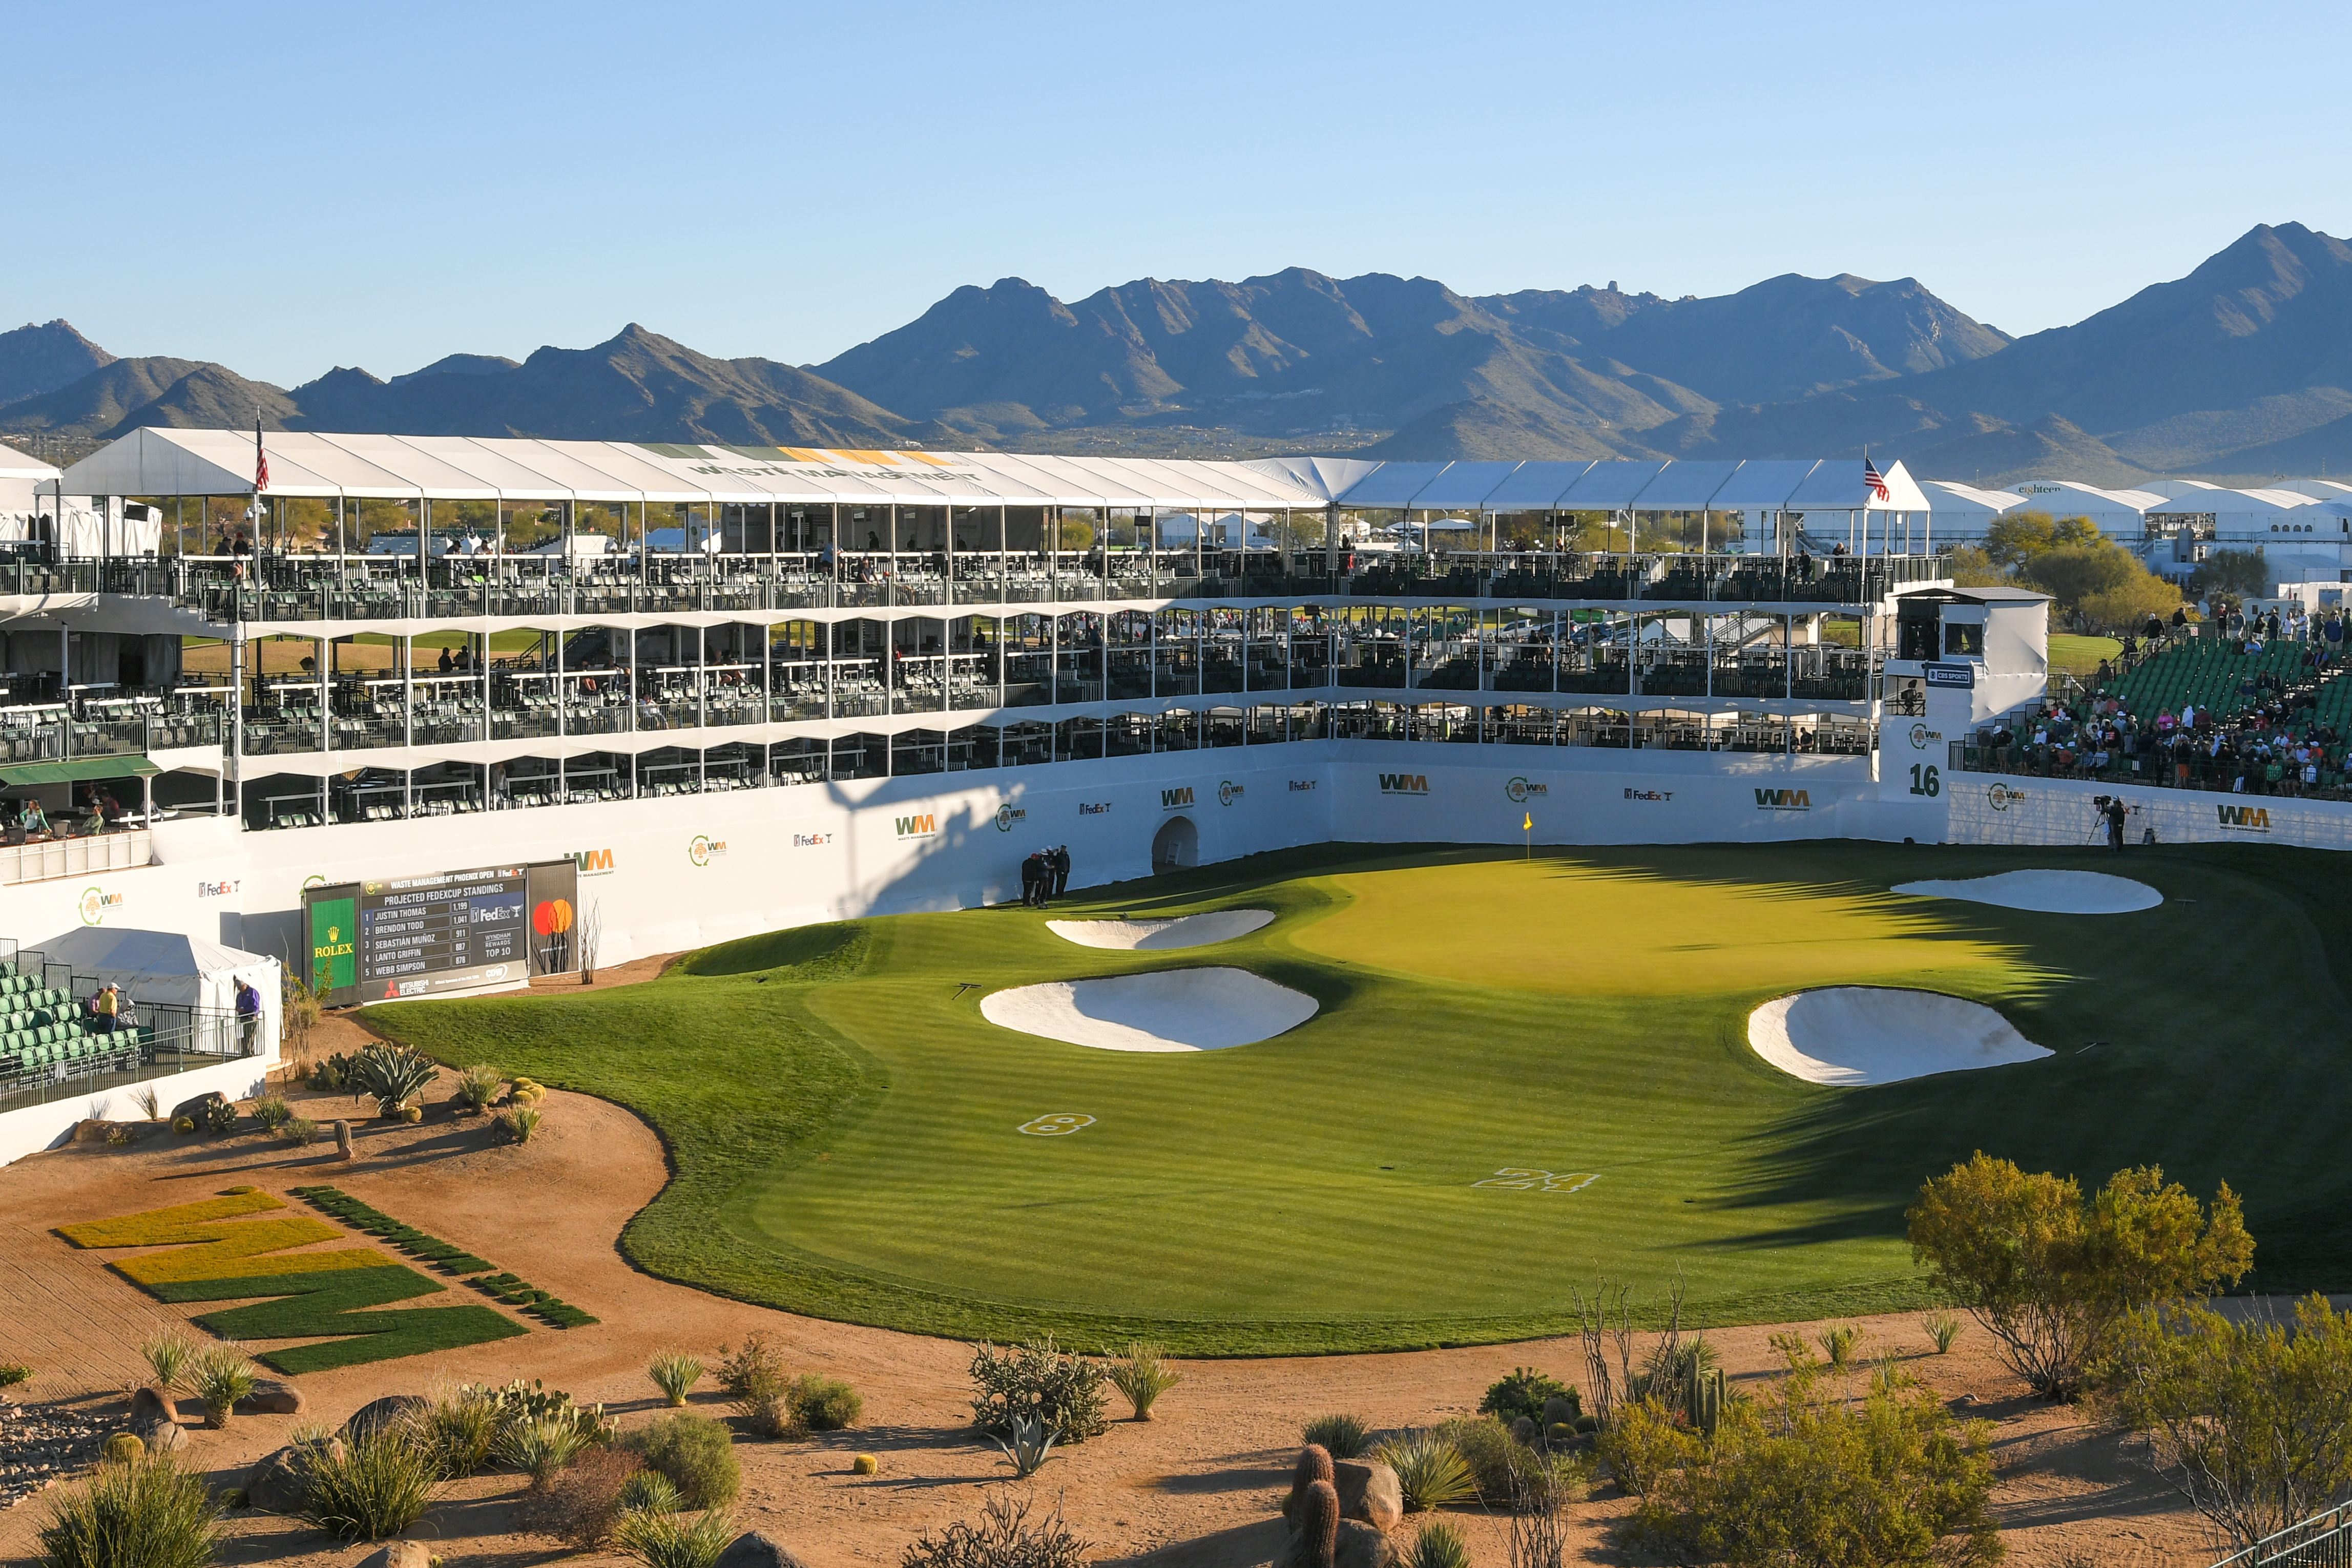 Waste Management Phoenix Open 2021 DFS picks Our experts favorite plays (and fades) in each price range This is the Loop Golf Digest